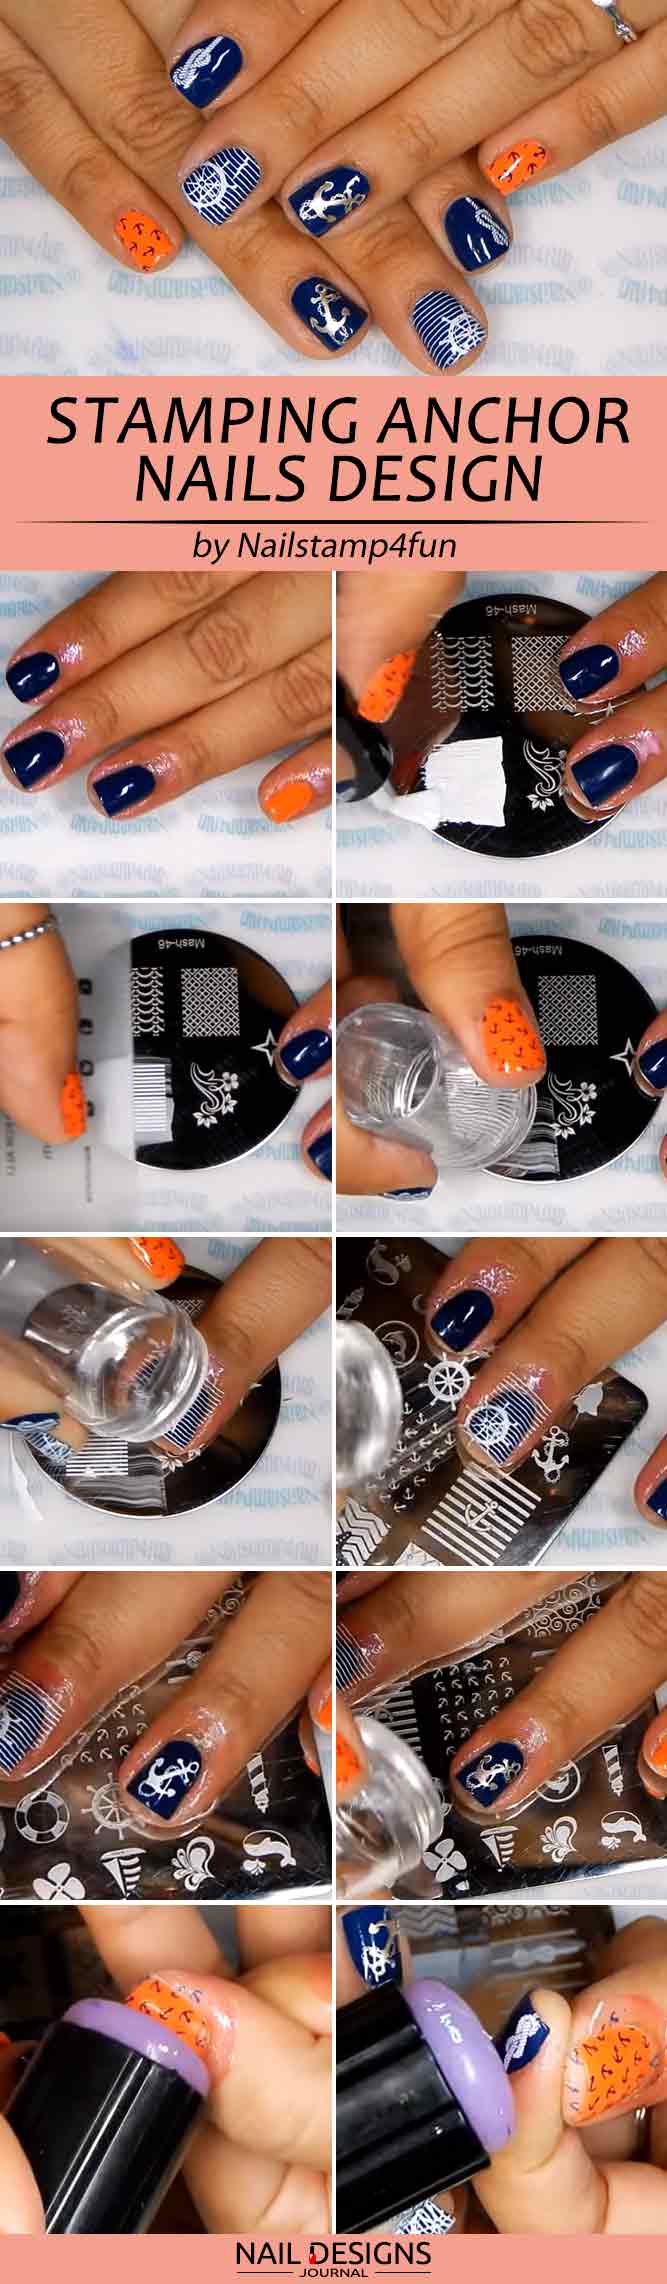 Stamping Methods To Make An Anchor Nails Design